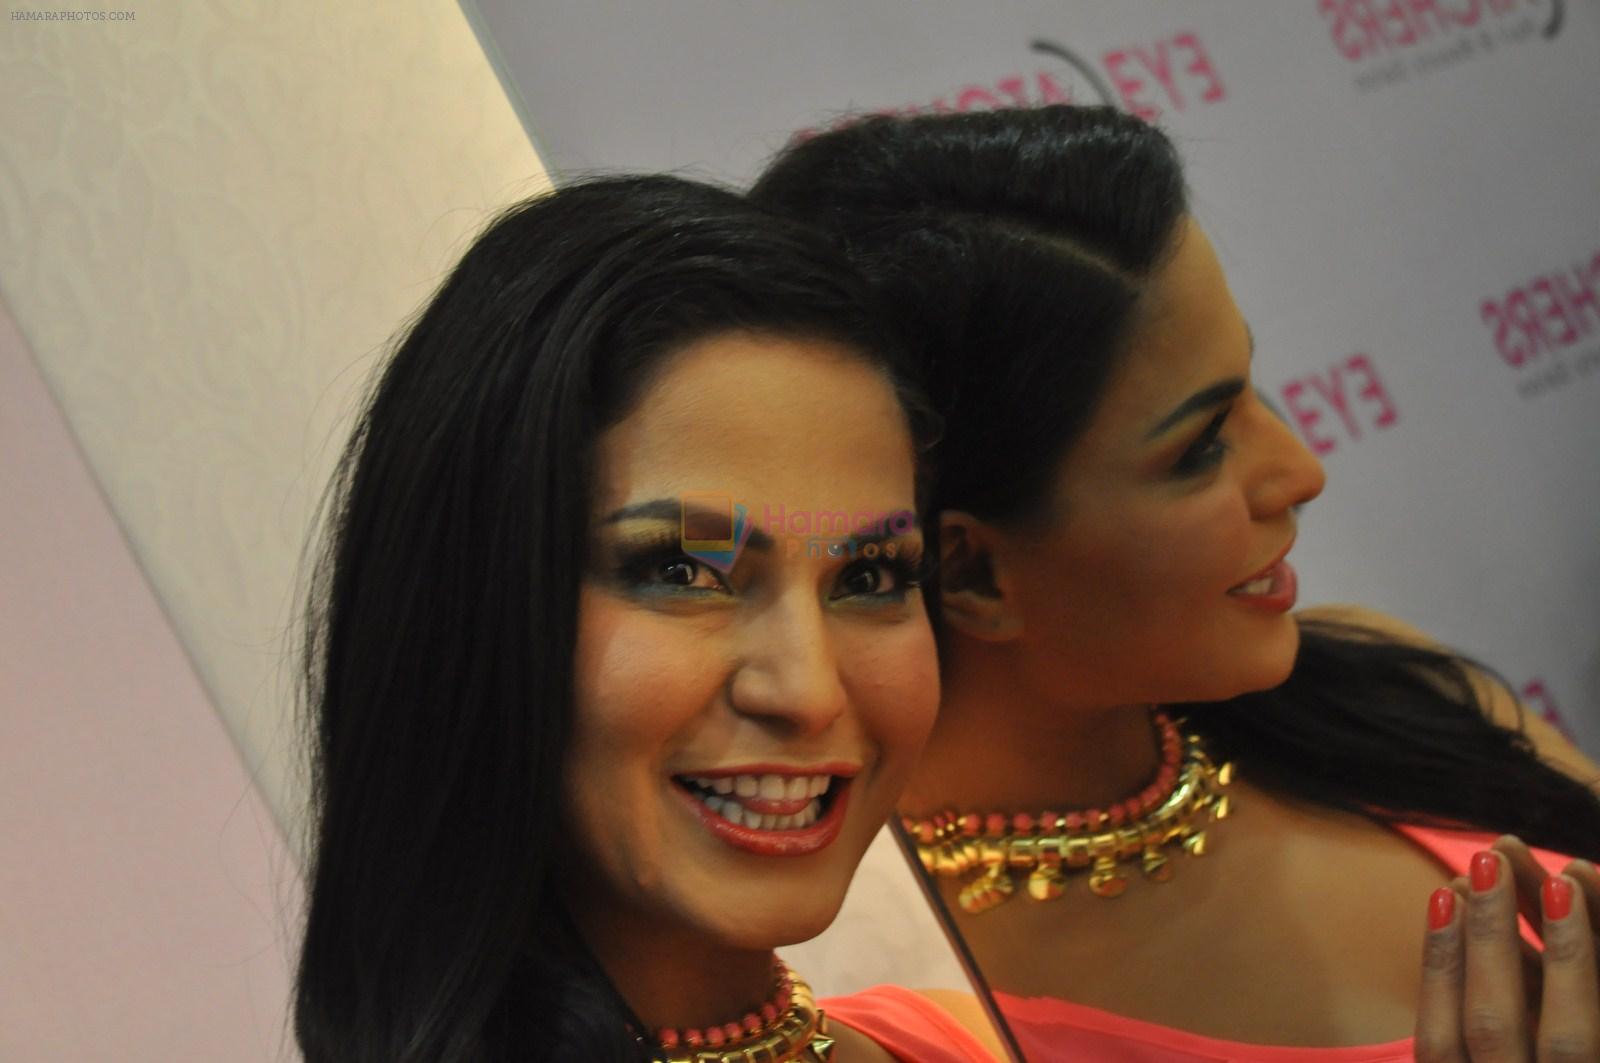 Veena Malik visits EyeCatchers, Hair & Beauty Salon for the promotion of her film Zindagi 50 50 in City Centre II Mall, Rajarhat on 9th May 2013